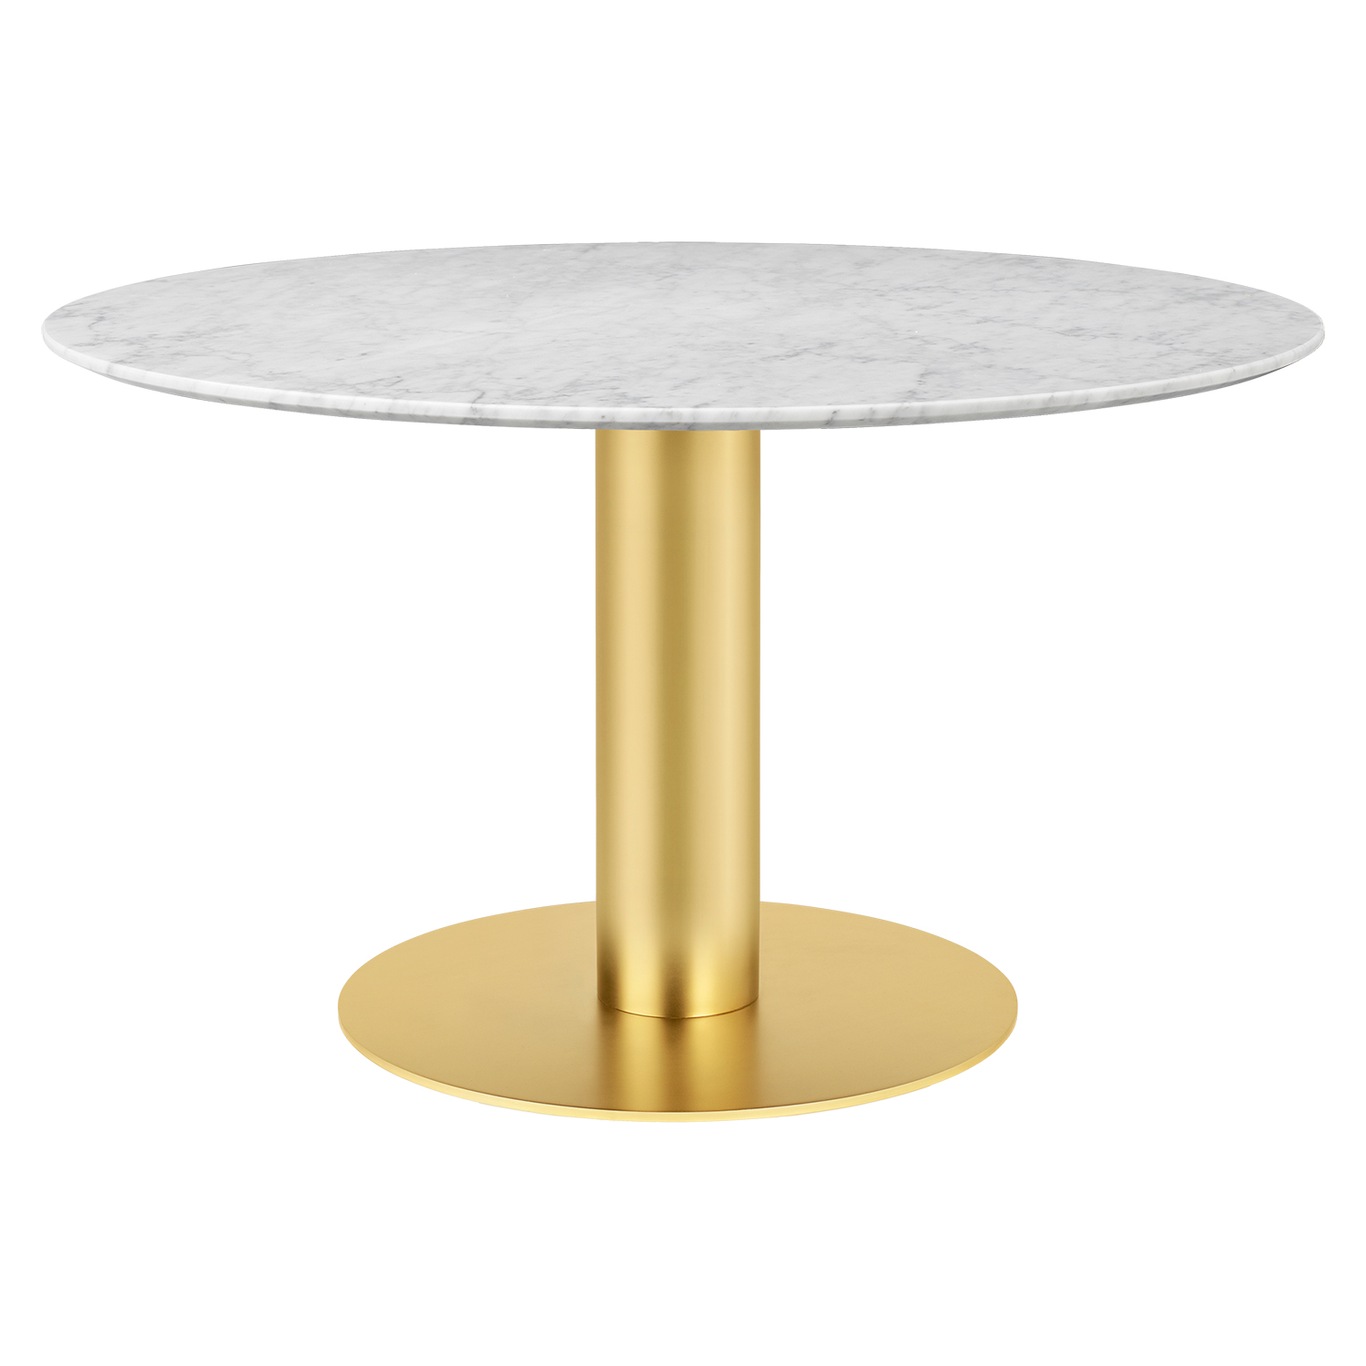 2.0 Dining Table, Brass/White Marble Ø130cm